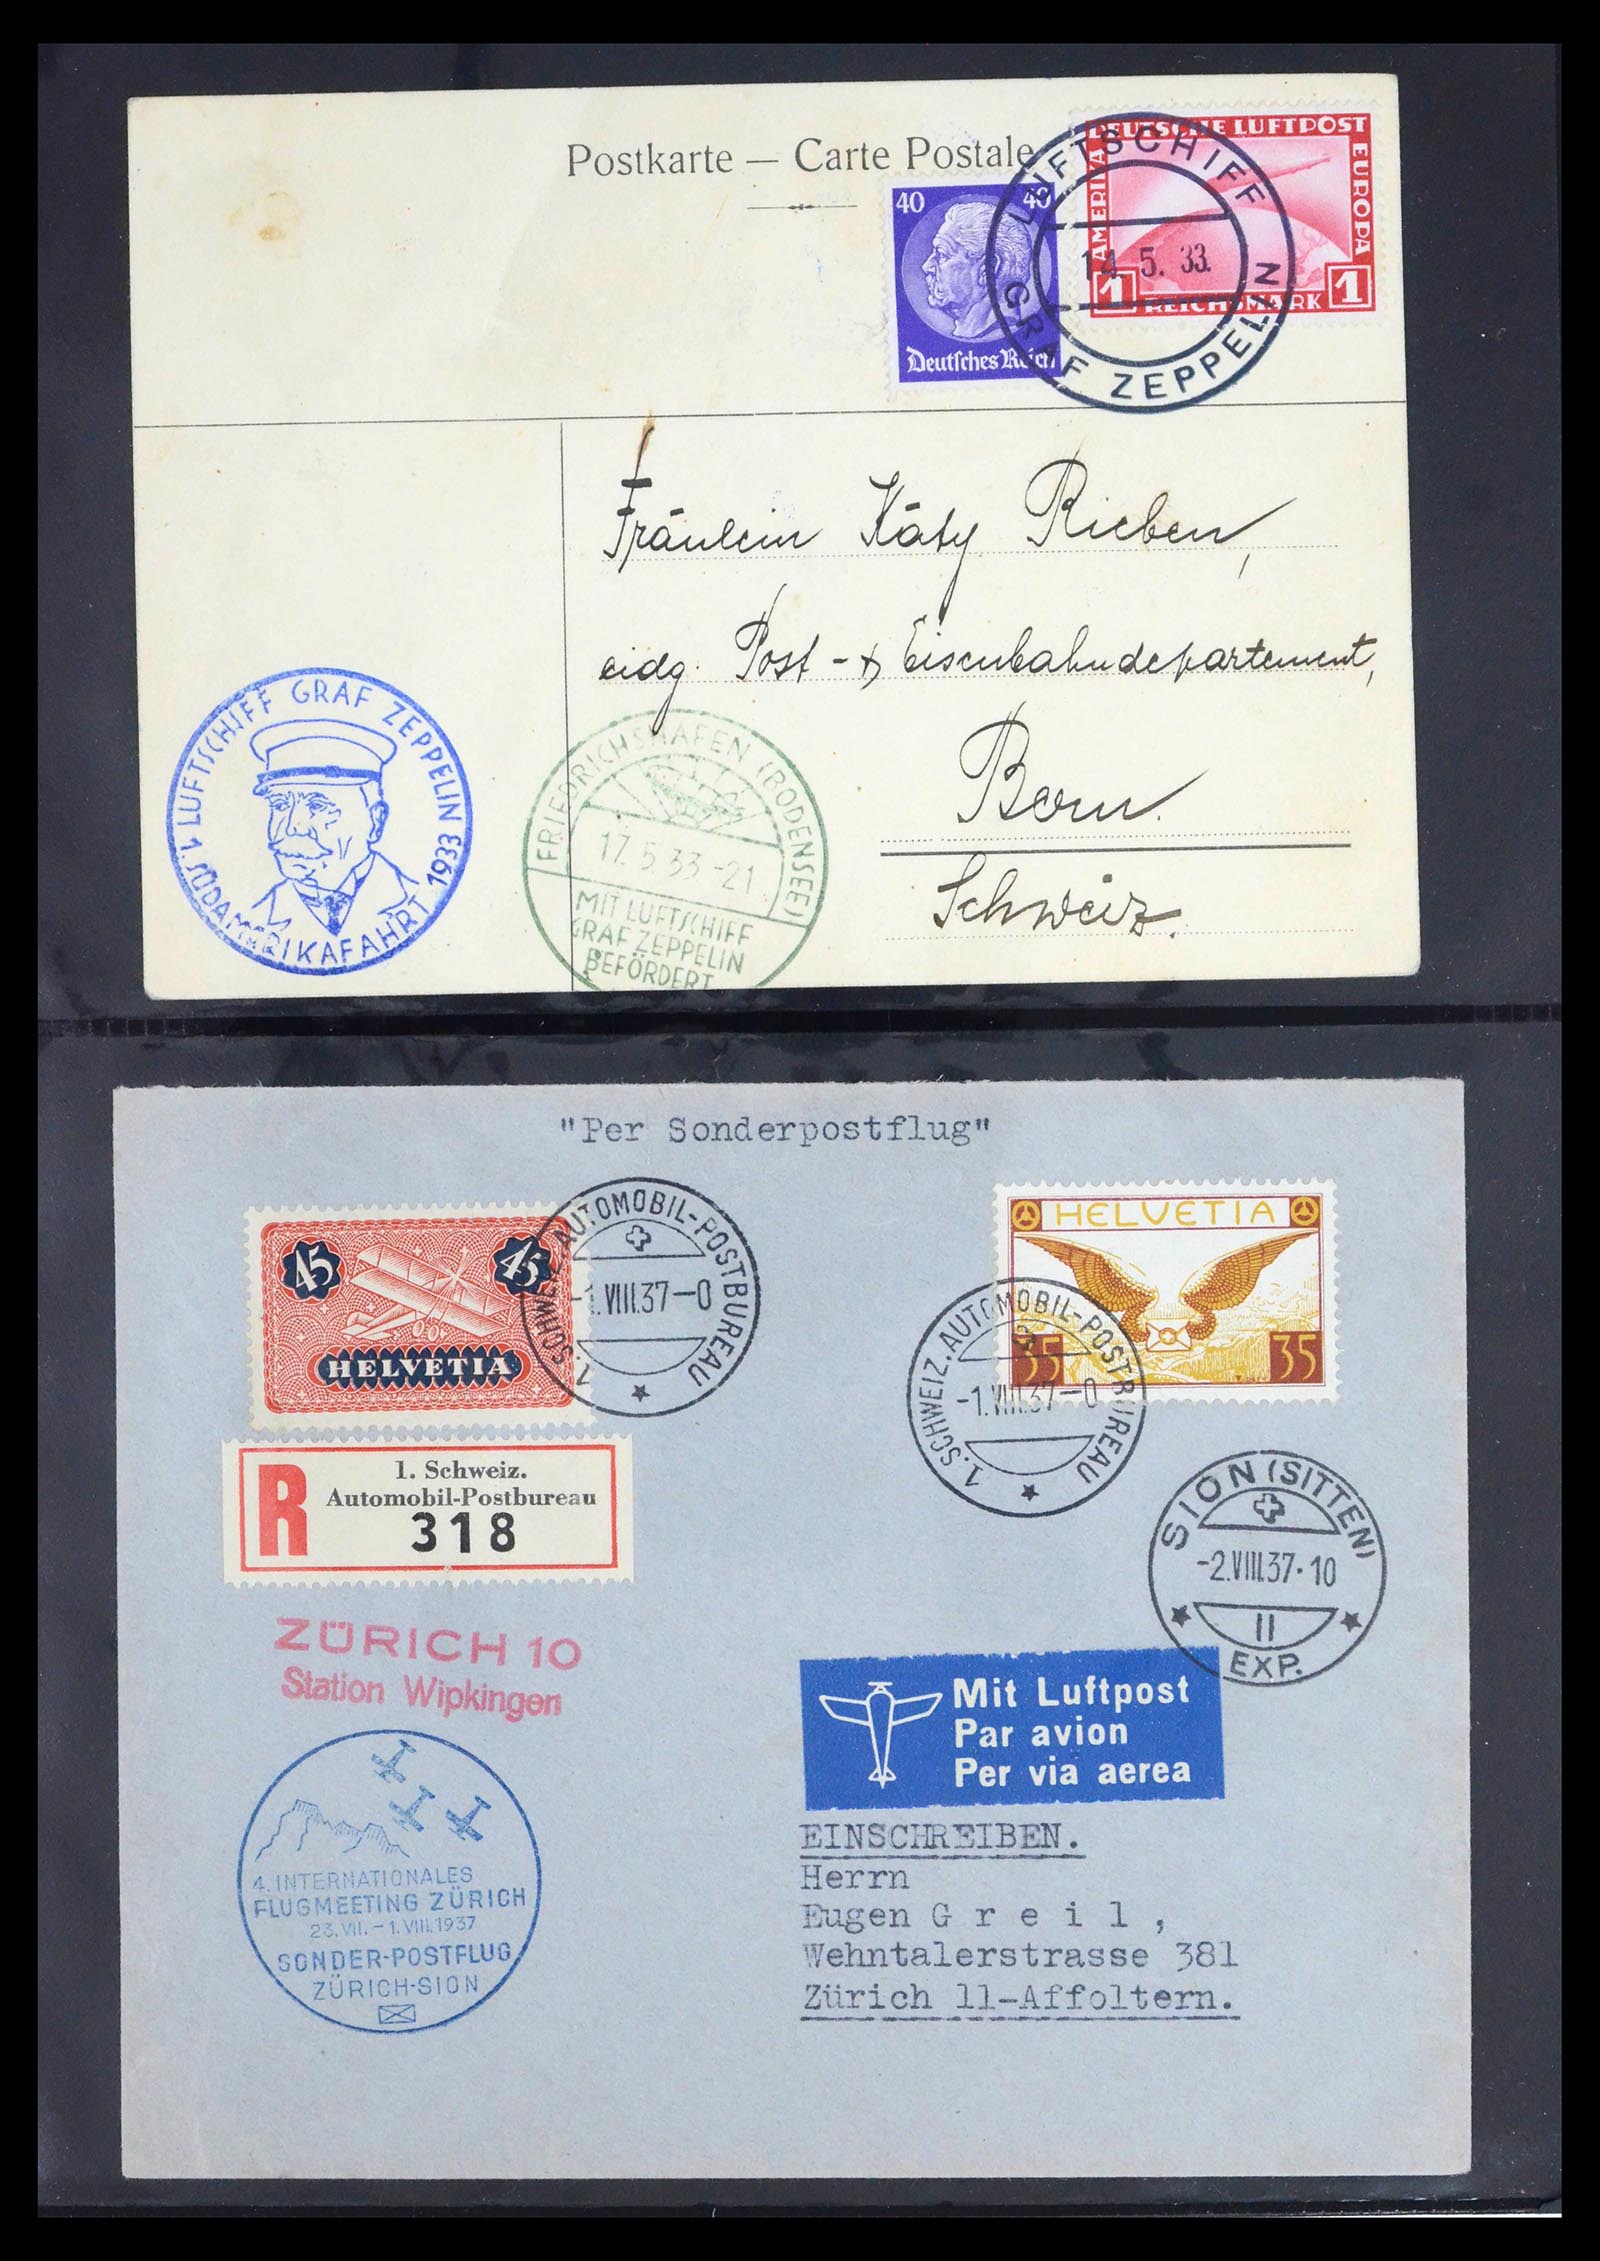 39533 0008 - Stamp collection 39533 Zwitserland airmail covers 1925-1960.